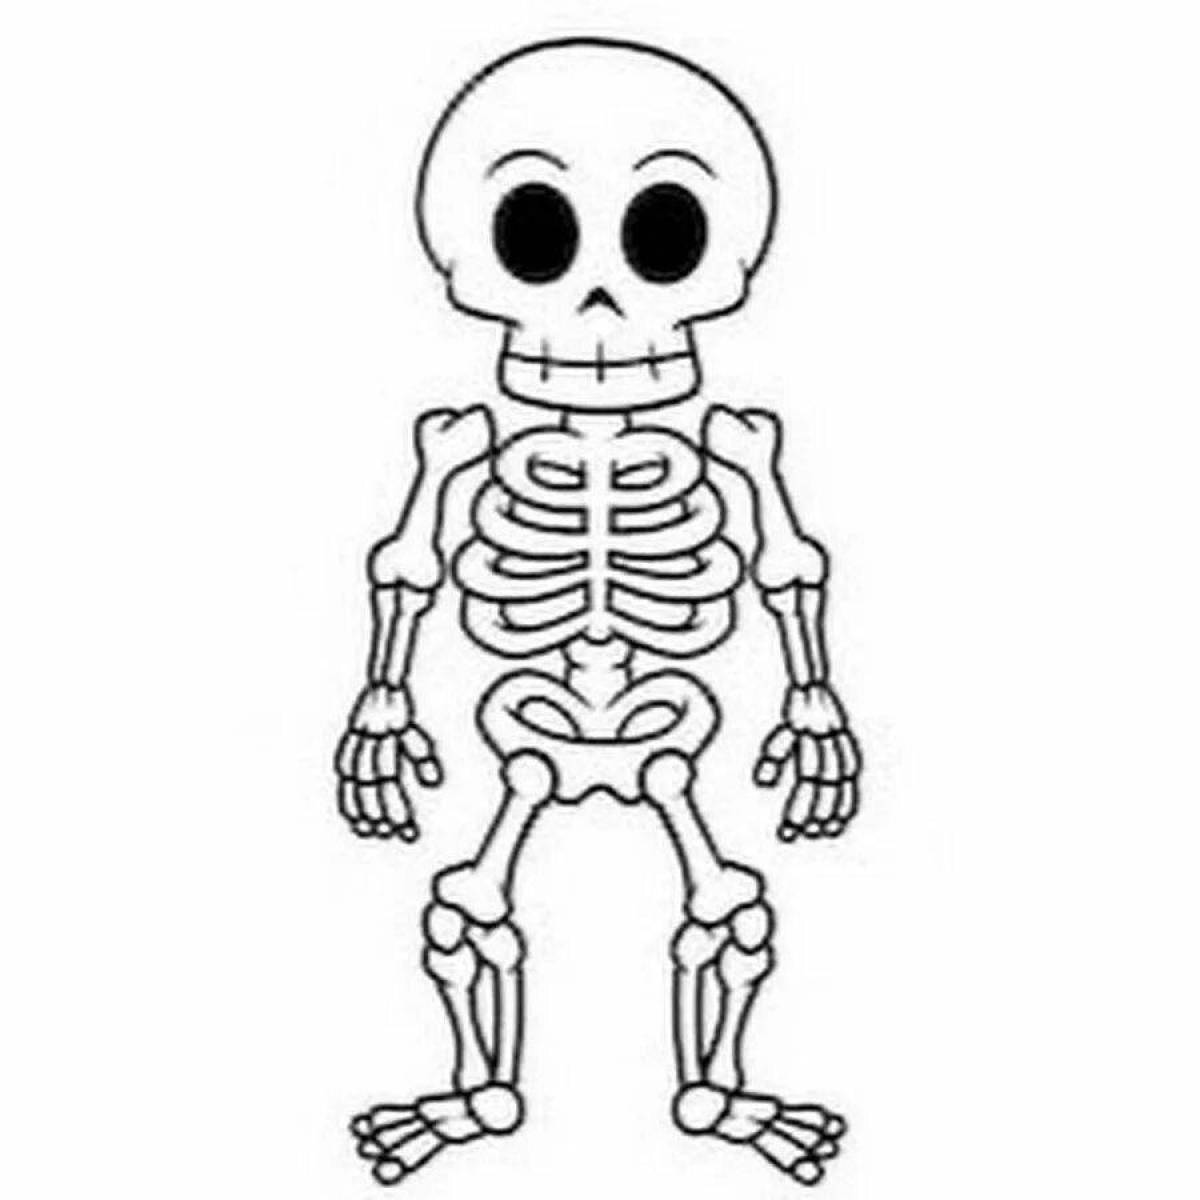 A fun coloring of the human skeleton for children